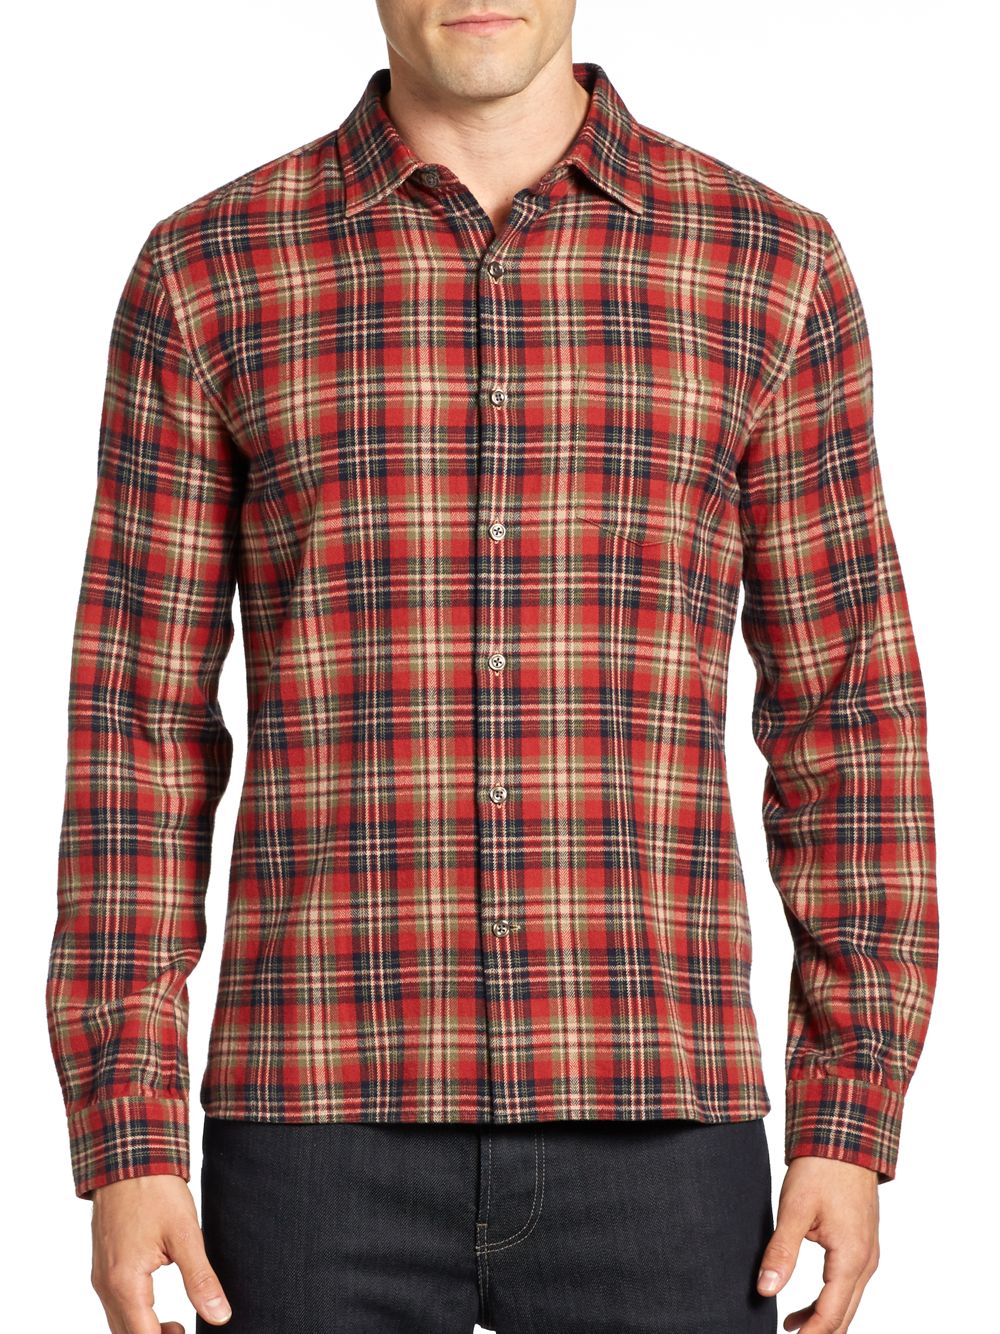 Vince Flannel Plaid Shirt in Red Orange (Red) for Men - Lyst